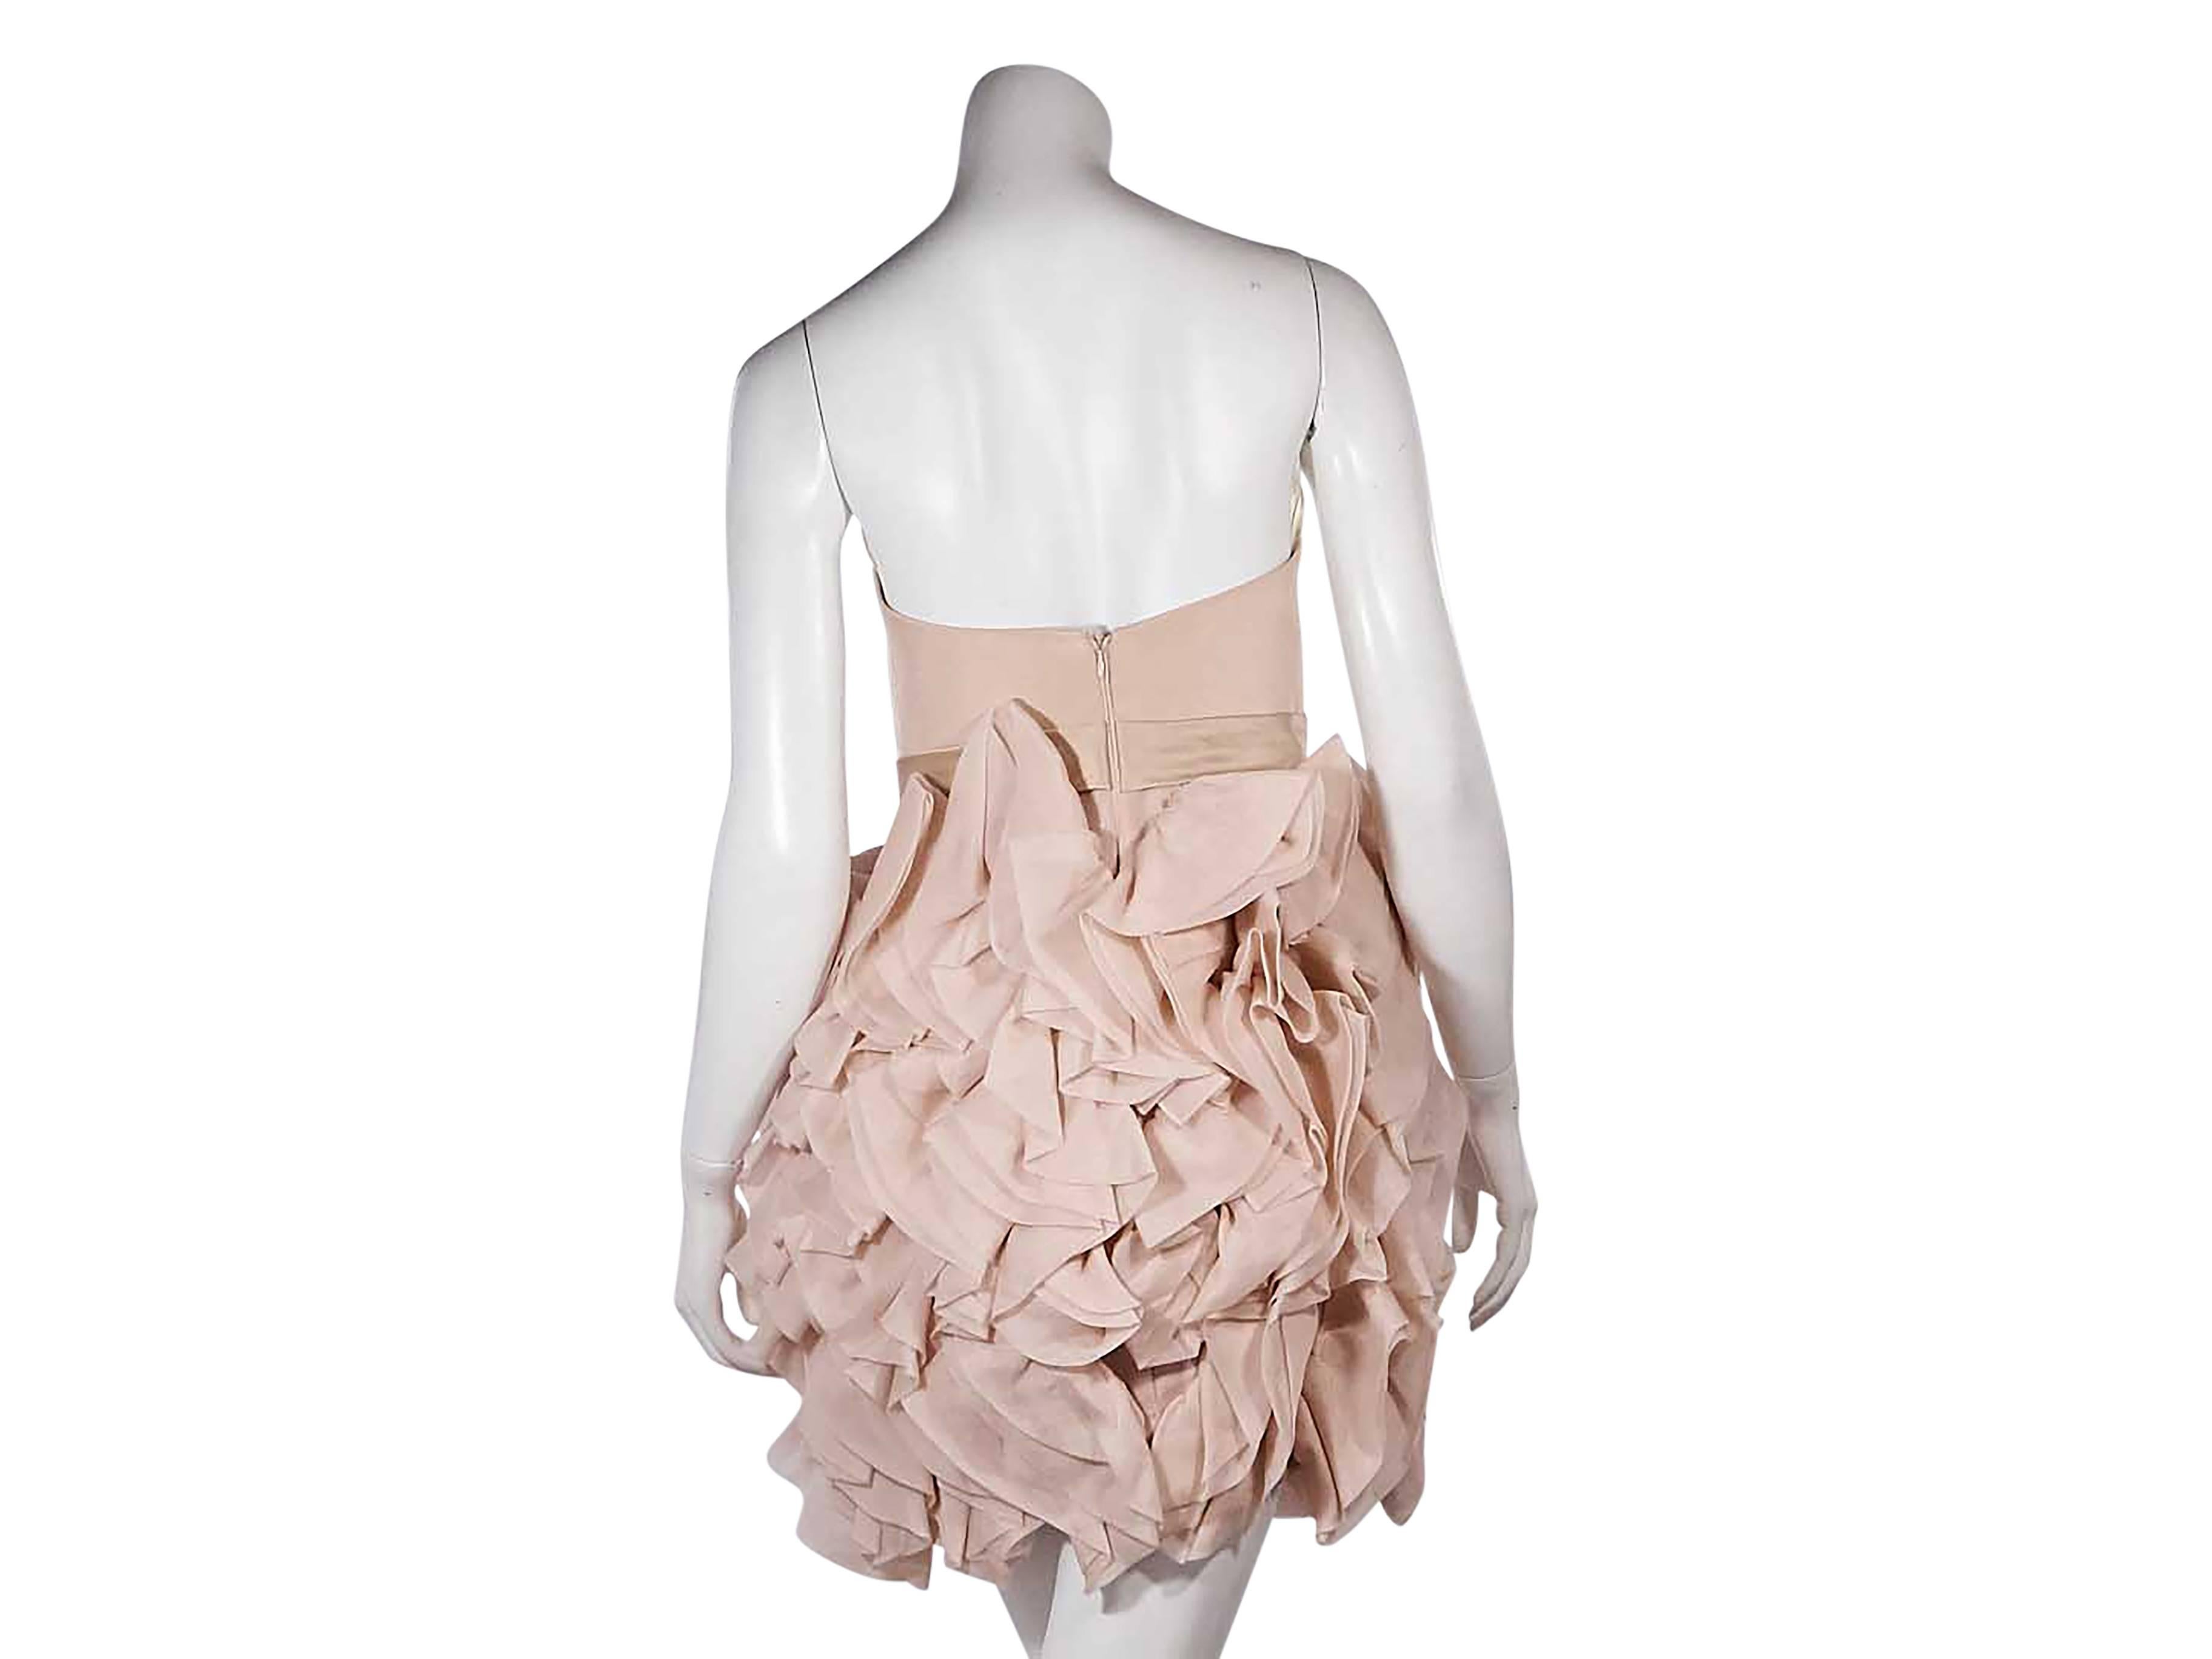 Product details:  Blush pink strapless mini dress by Marchesa Notte.  Sweetheart neckline.  Fitted bodice.  Banded waist.  Ruffled skirting.  Concealed back zip closure. 
Condition: Very good.
Est. Retail $ 628.00
US Size 6